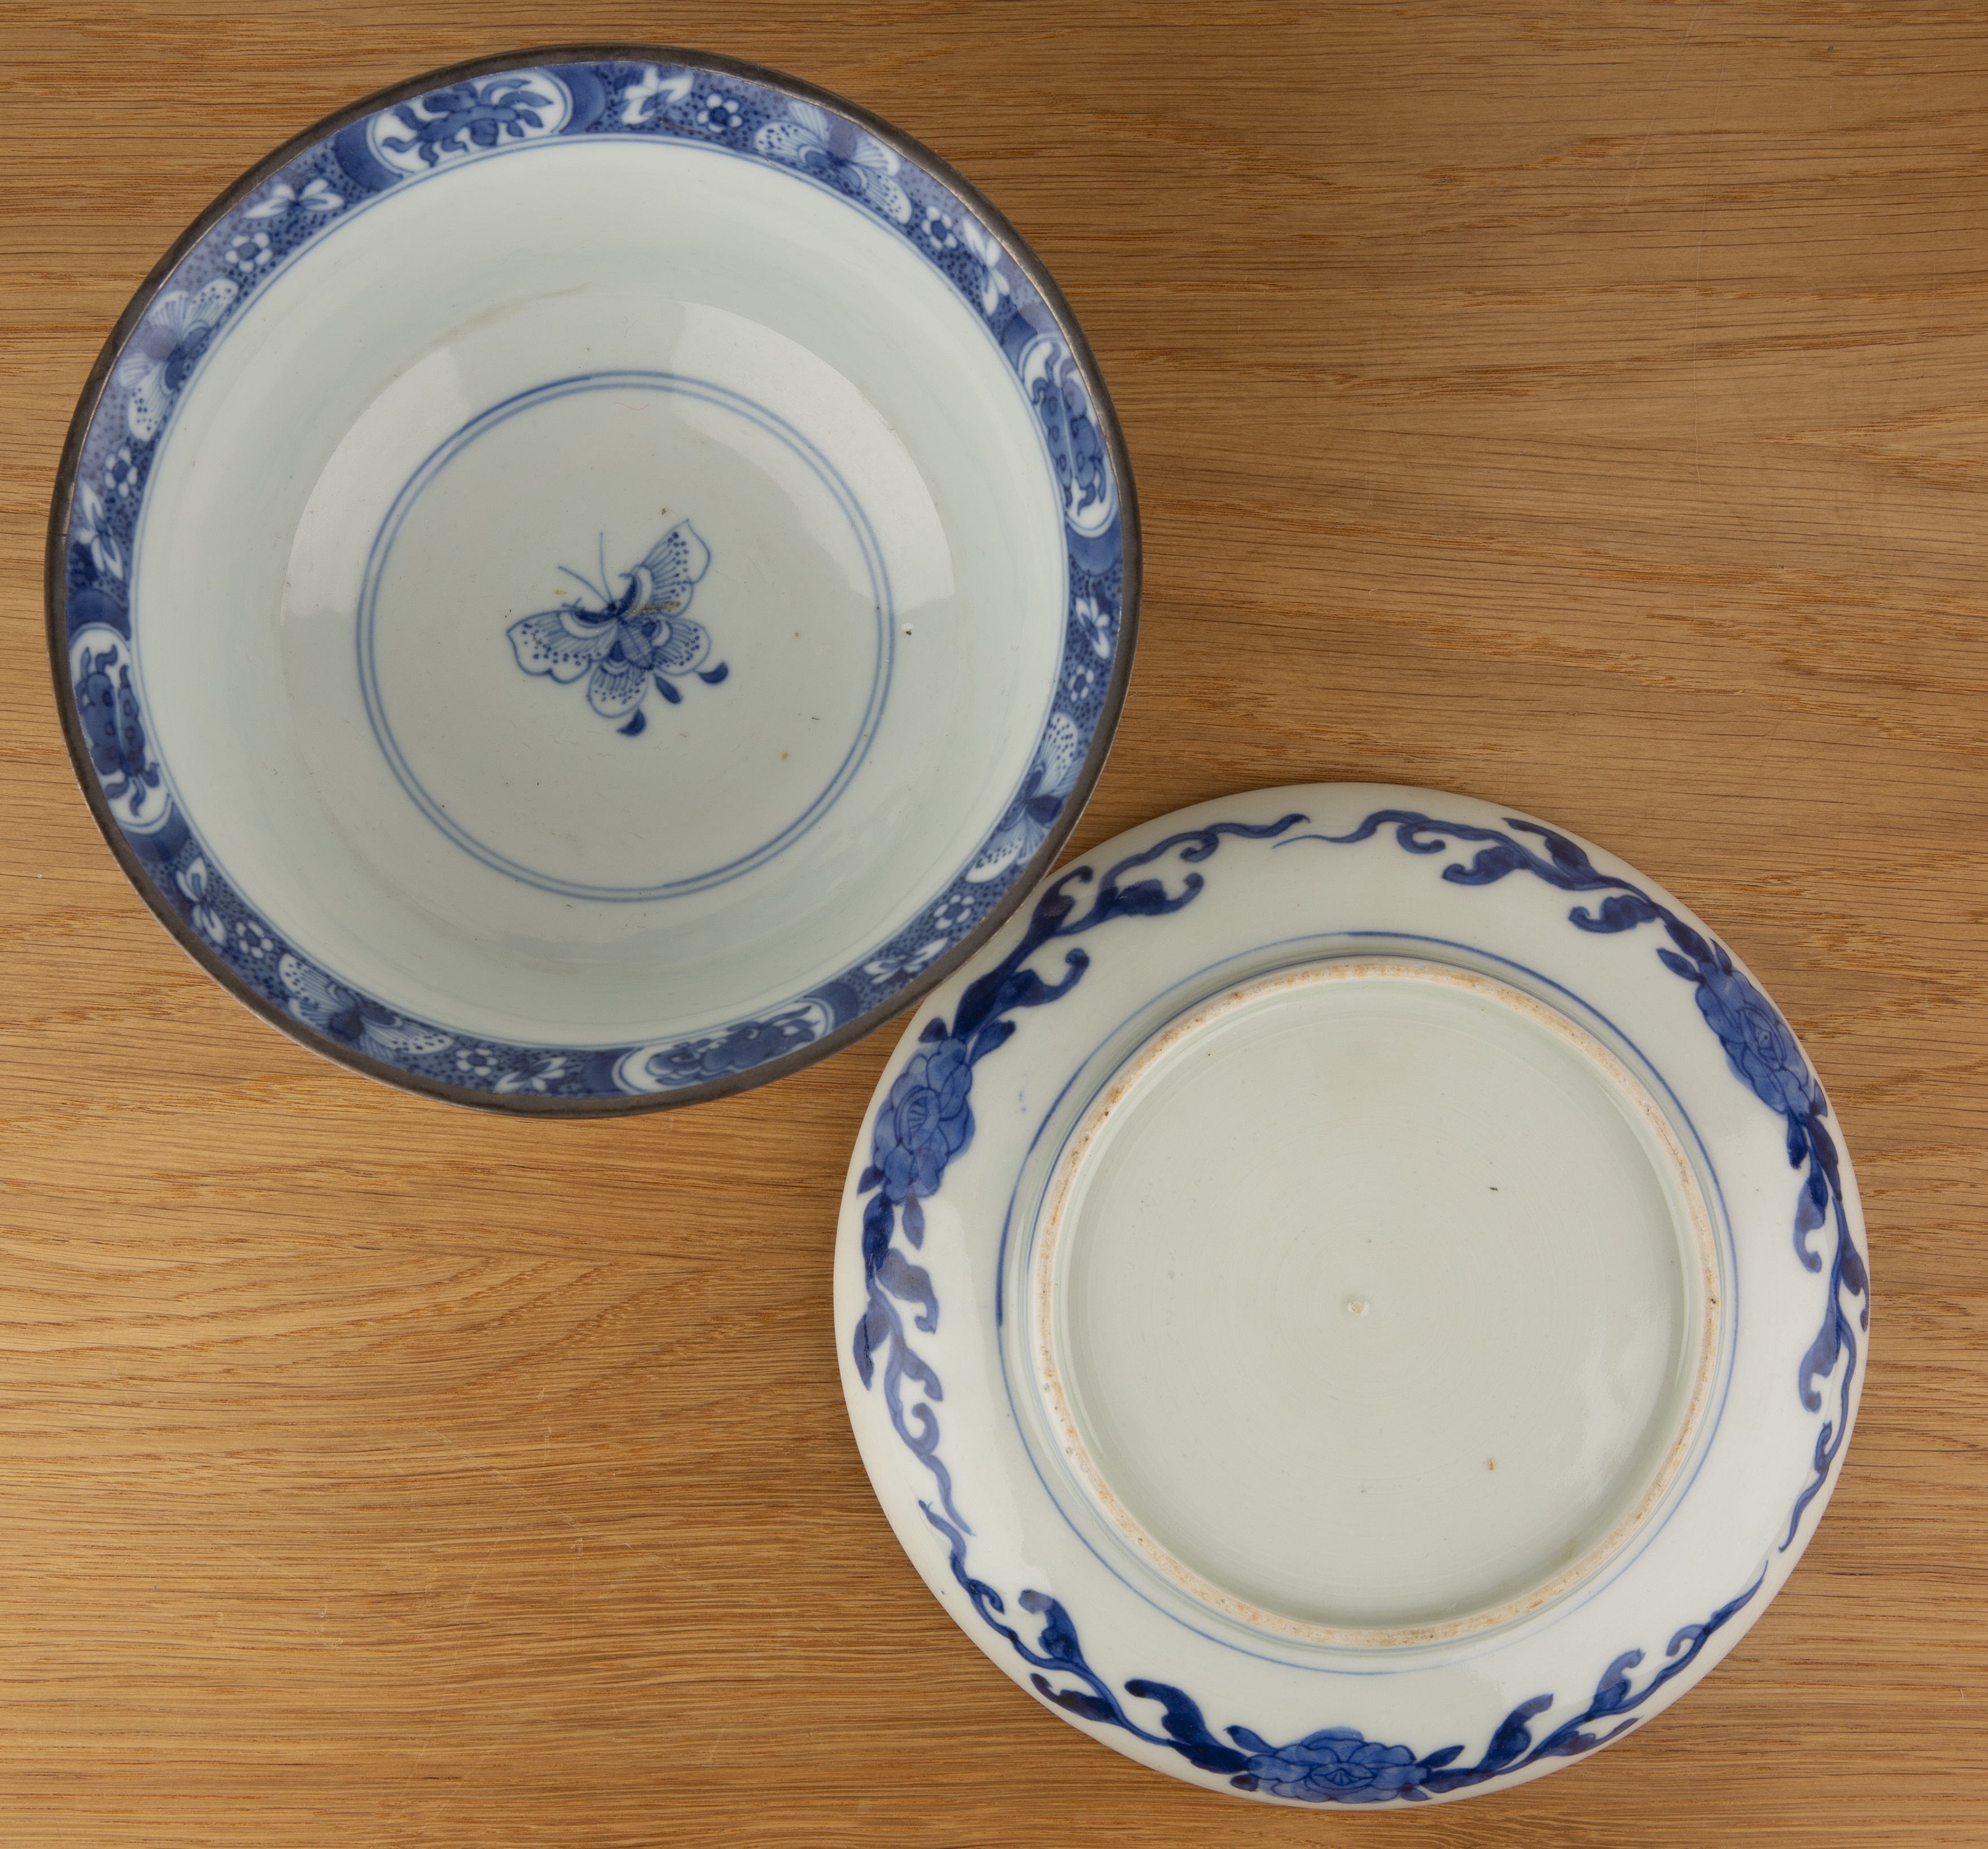 Group of blue and white porcelain Chinese and Japanese to include four shallow dragon dishes, 15.9cm - Image 4 of 5